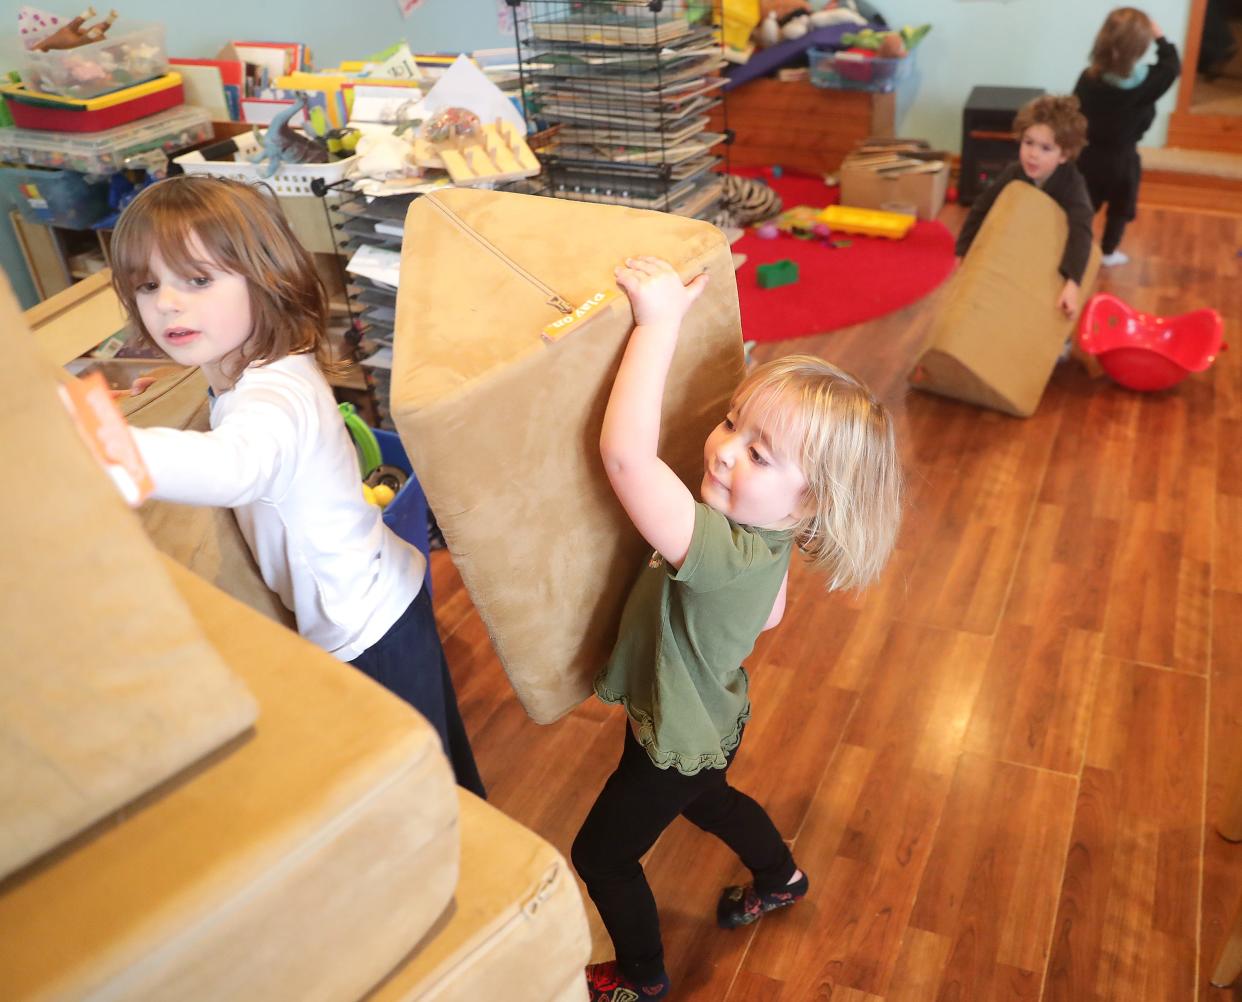 Kai Wells, left, 5, and Quinn Wells, 3, help pick up before going outside to play at Corrine's Little Explorers on Jan. 25 in New Glarus. The home-based family child care center is owned by Corrine Hendrickson. The children's mother, Diana Rogers Wells, explained that she chose not to enroll Kai in public 4K this year and instead opted to keep him enrolled at Corrine's Little Explorers for a variety of reasons. If a Republican bill that would change public 4K in Wisconsin becomes law, families like Rogers Wells' would be able to keep their children enrolled in their trusted child care environment and still get free 4K instruction.